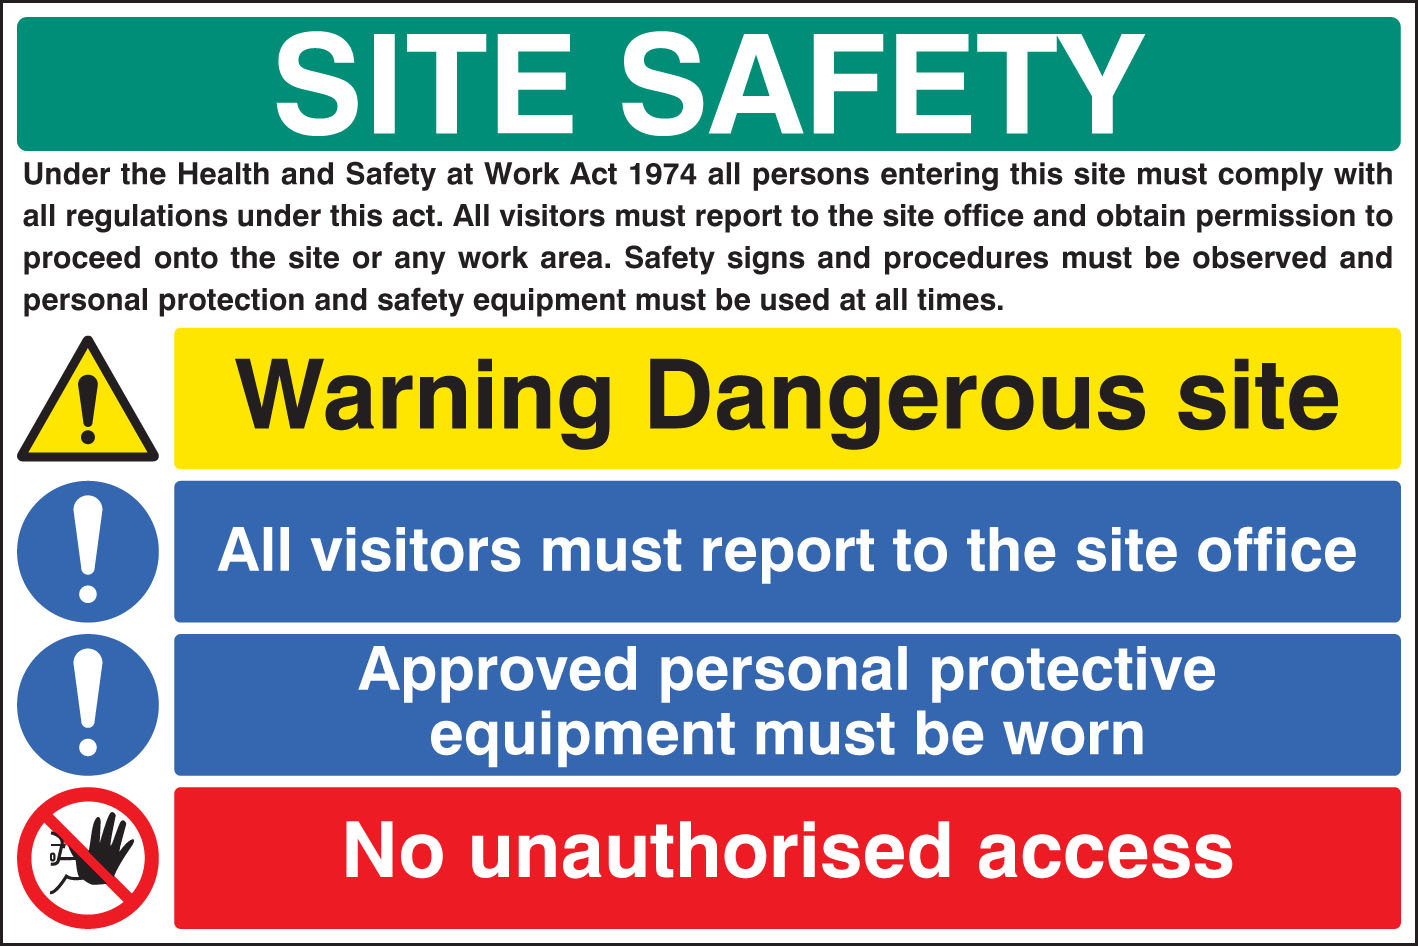 Site Safety - Visitors, Access, Protective Clothing Sign